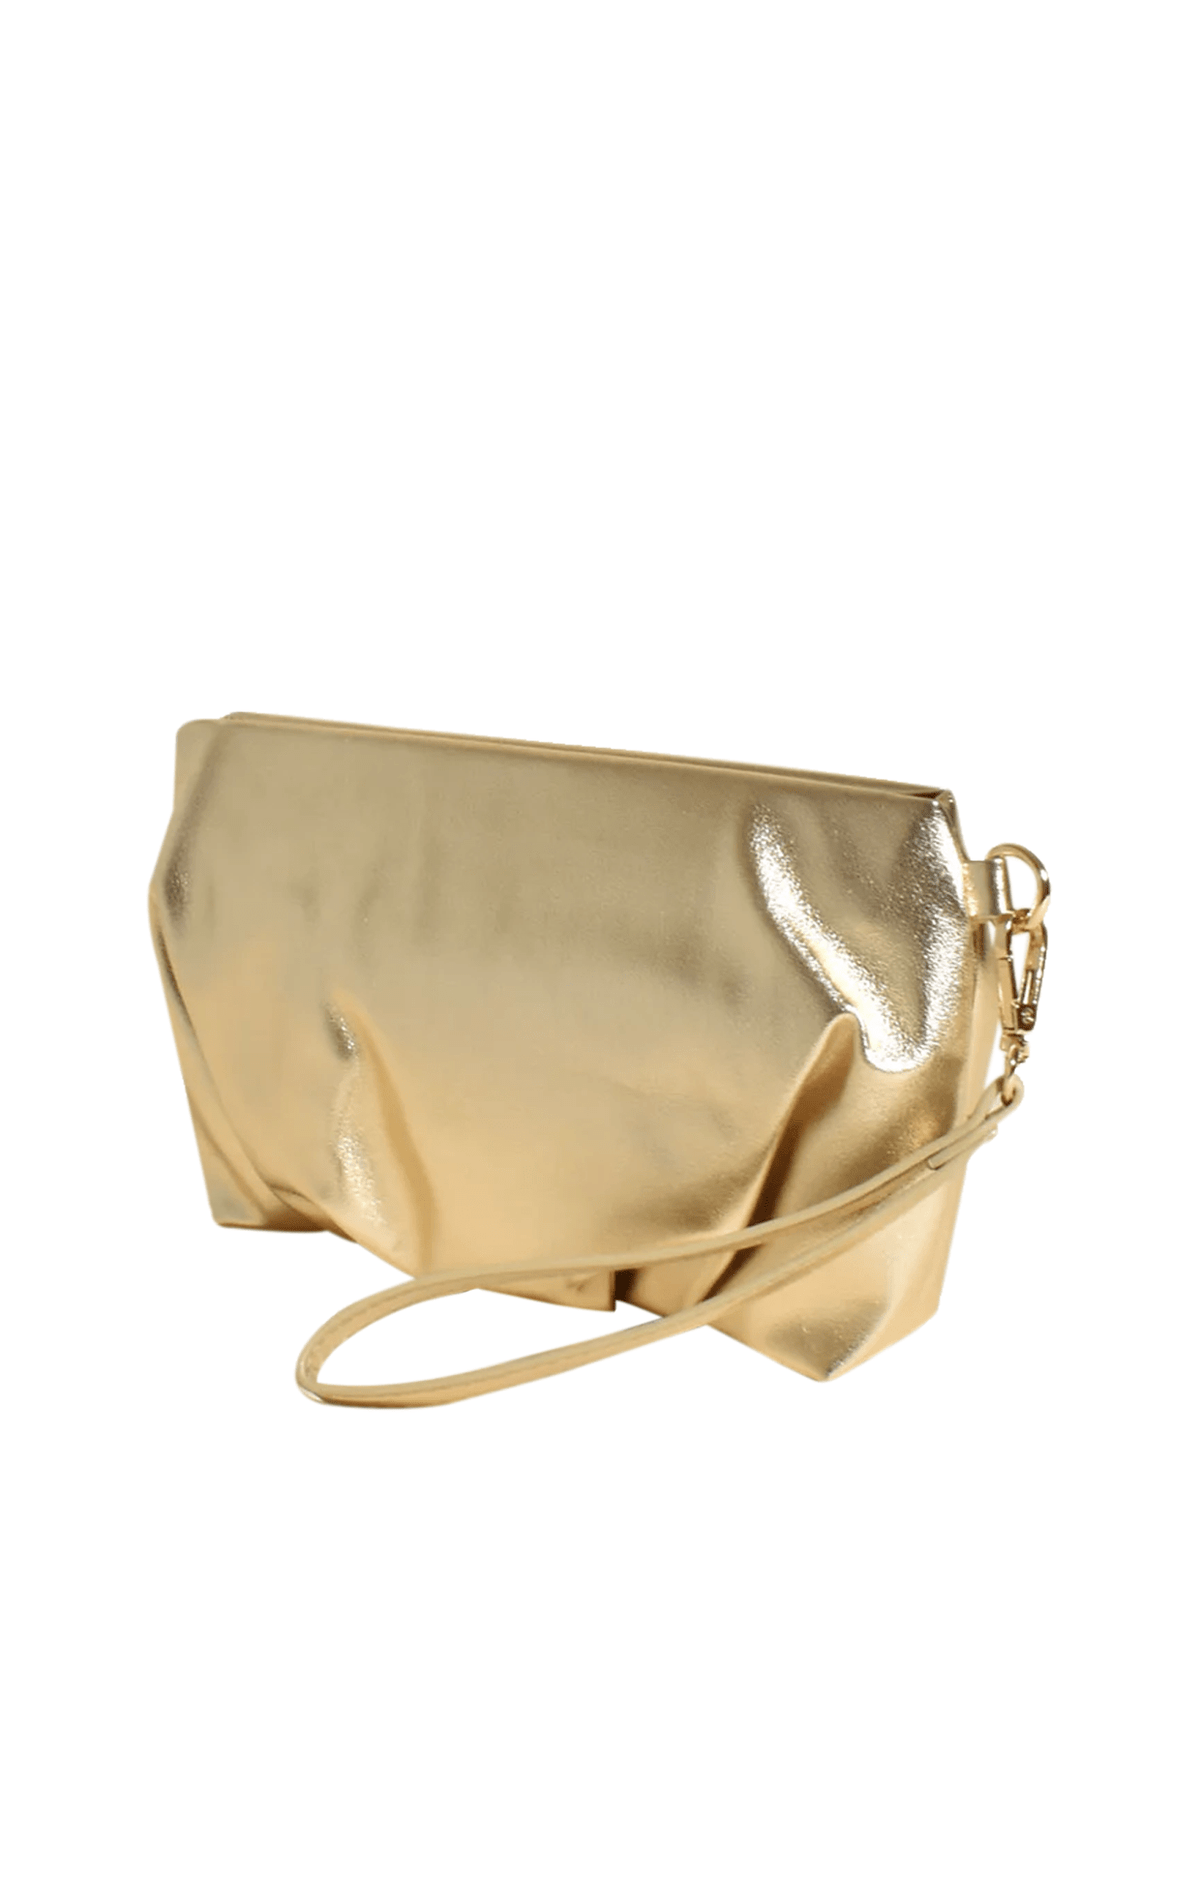 Bags OS / GOLD EMERSON CLUTCH IN GOLD